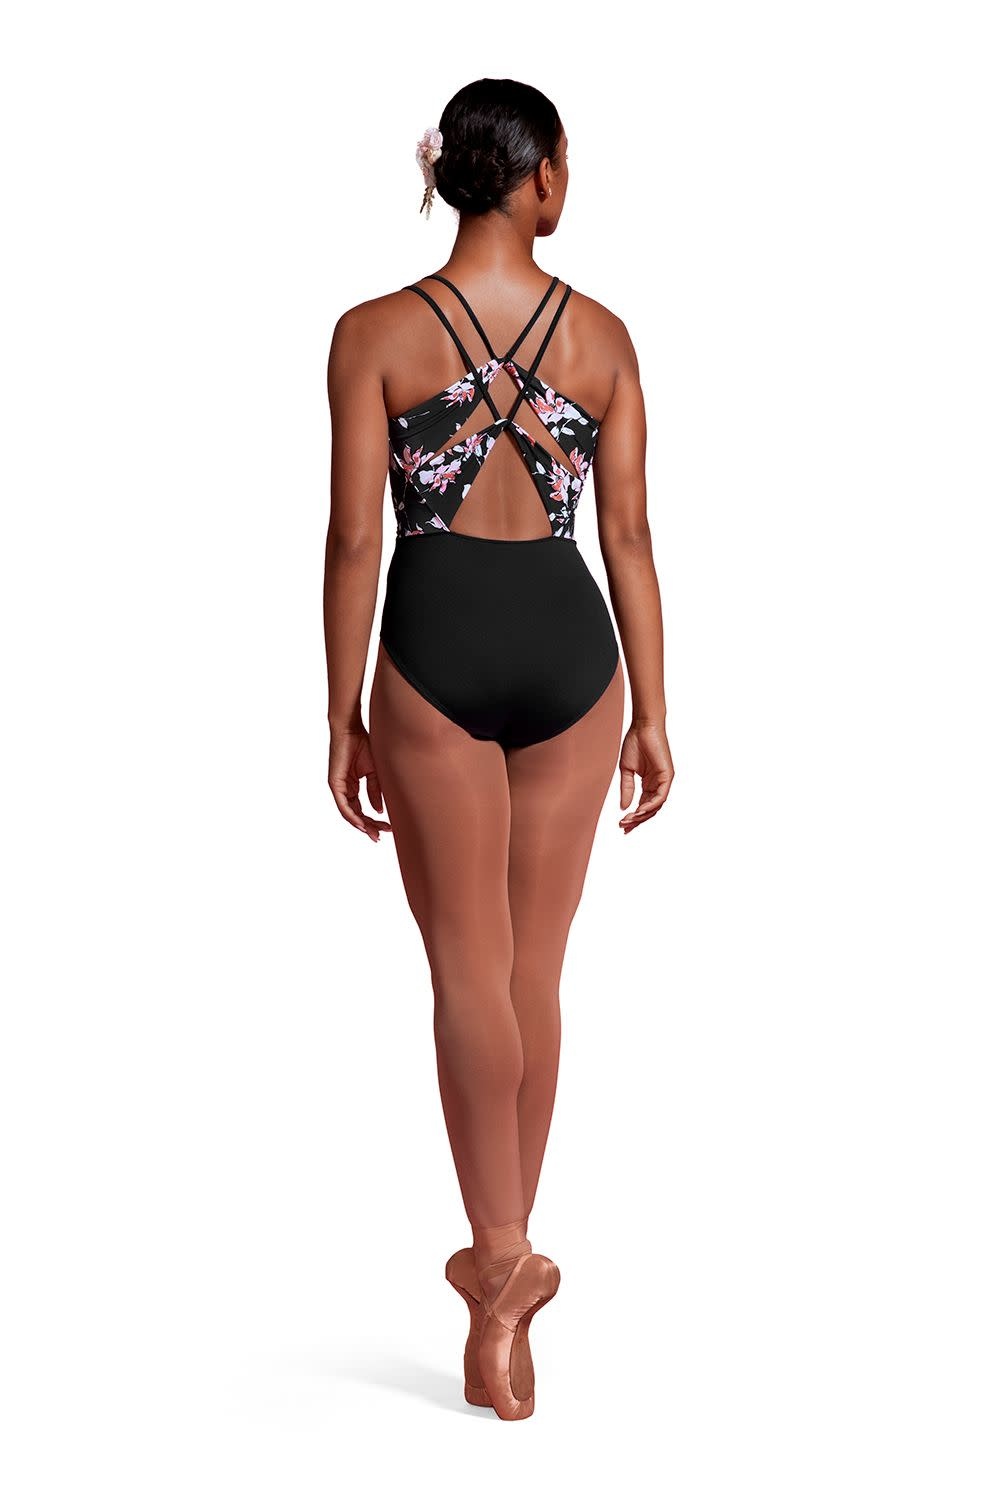 DANCING MARTEN - camisole leotard with hand braided straps -  sage/multicolor – Just A Corpse